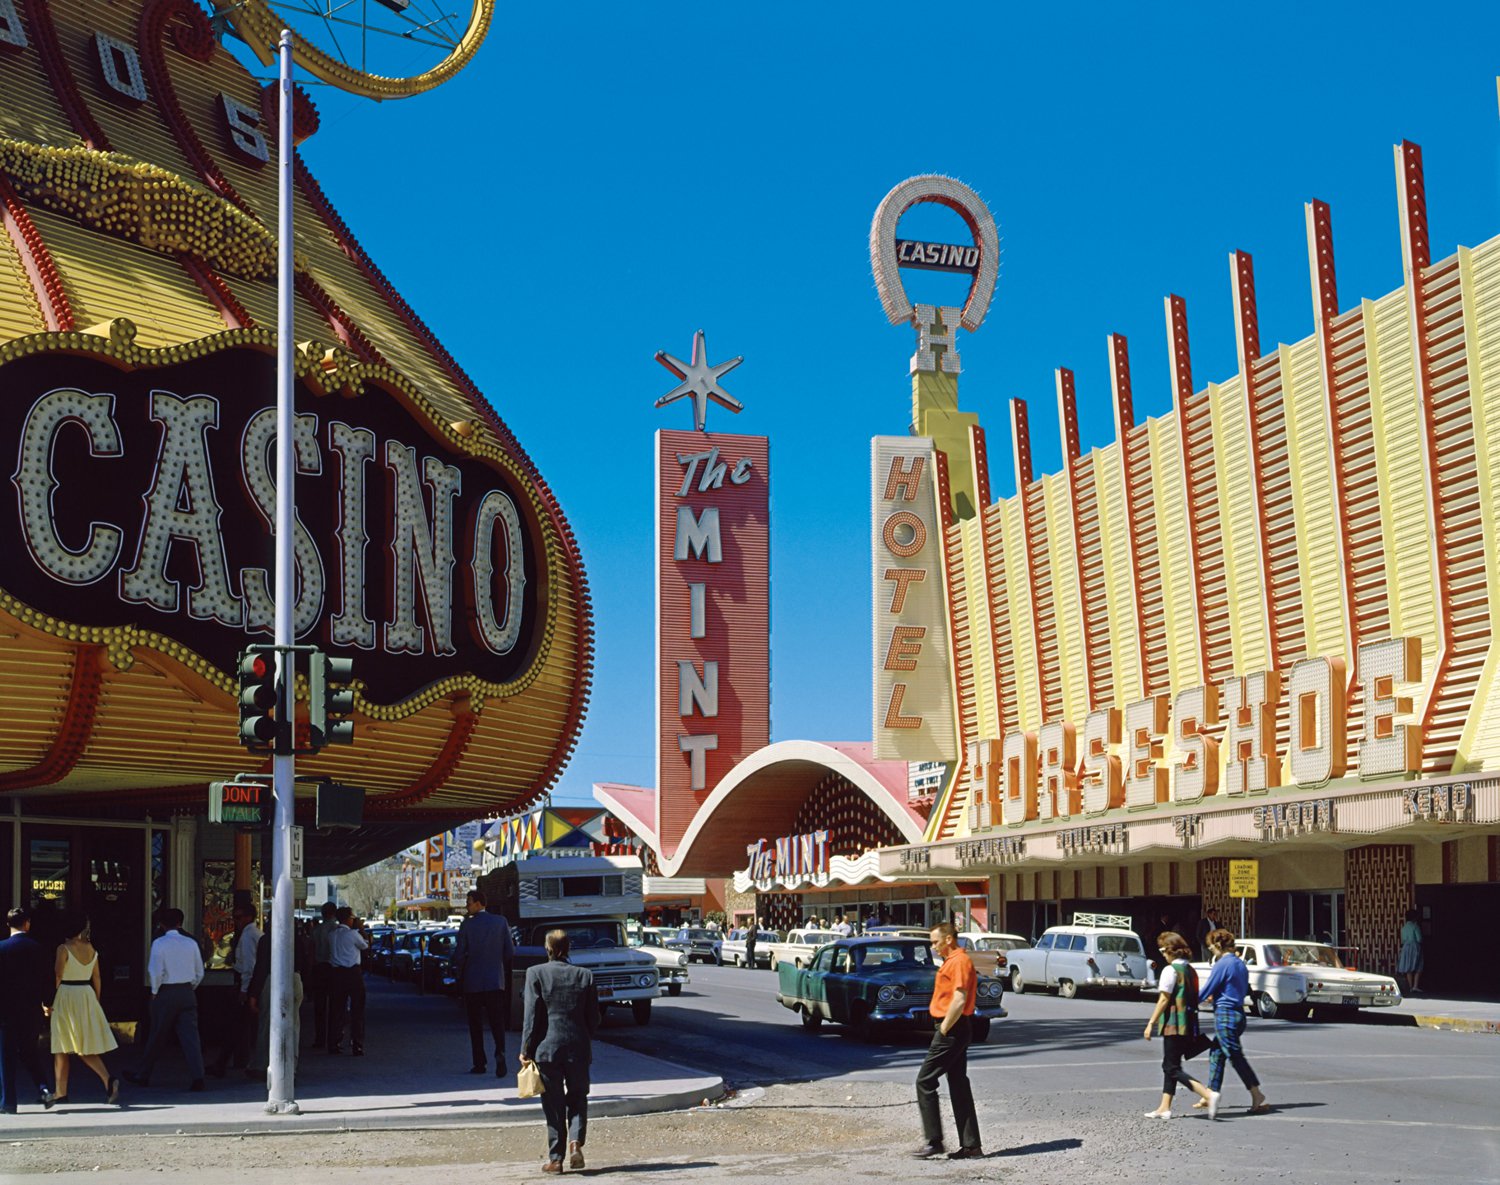 Exclusive: See Vintage Photos Showcasing the Golden Years of Las Vegas